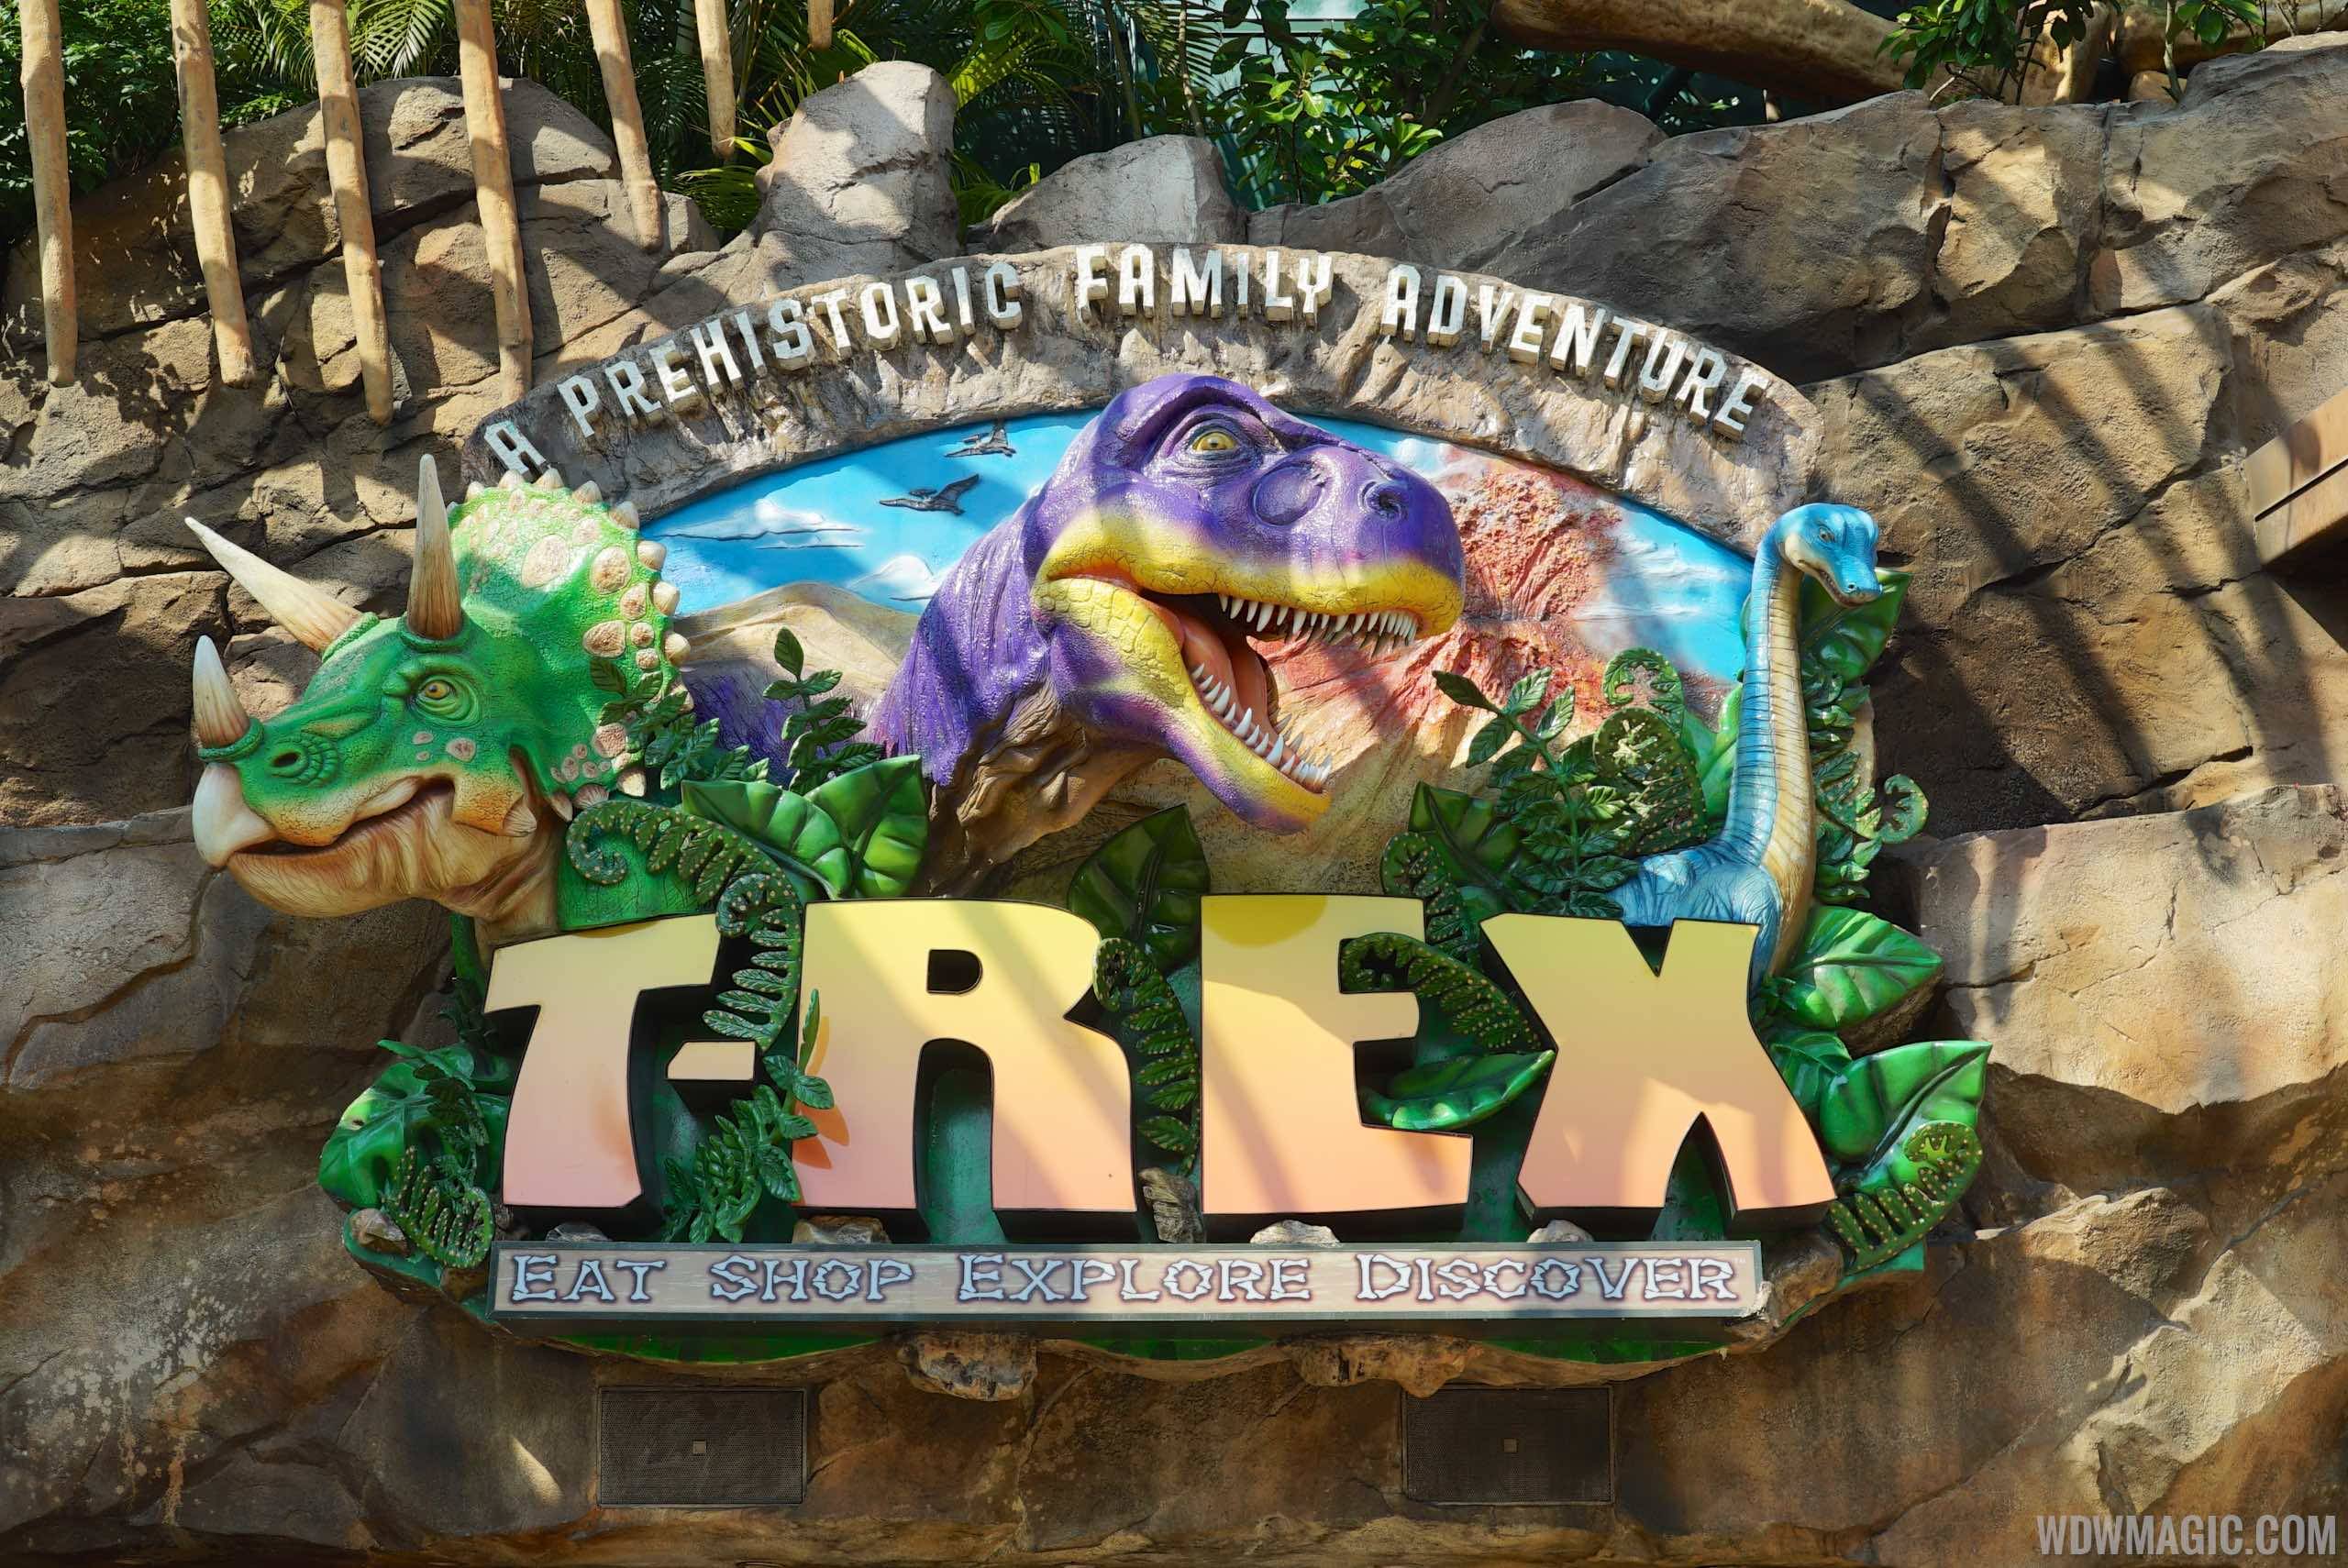 T-Rex Cafe at Disney Springs offering Breakfast with Santa